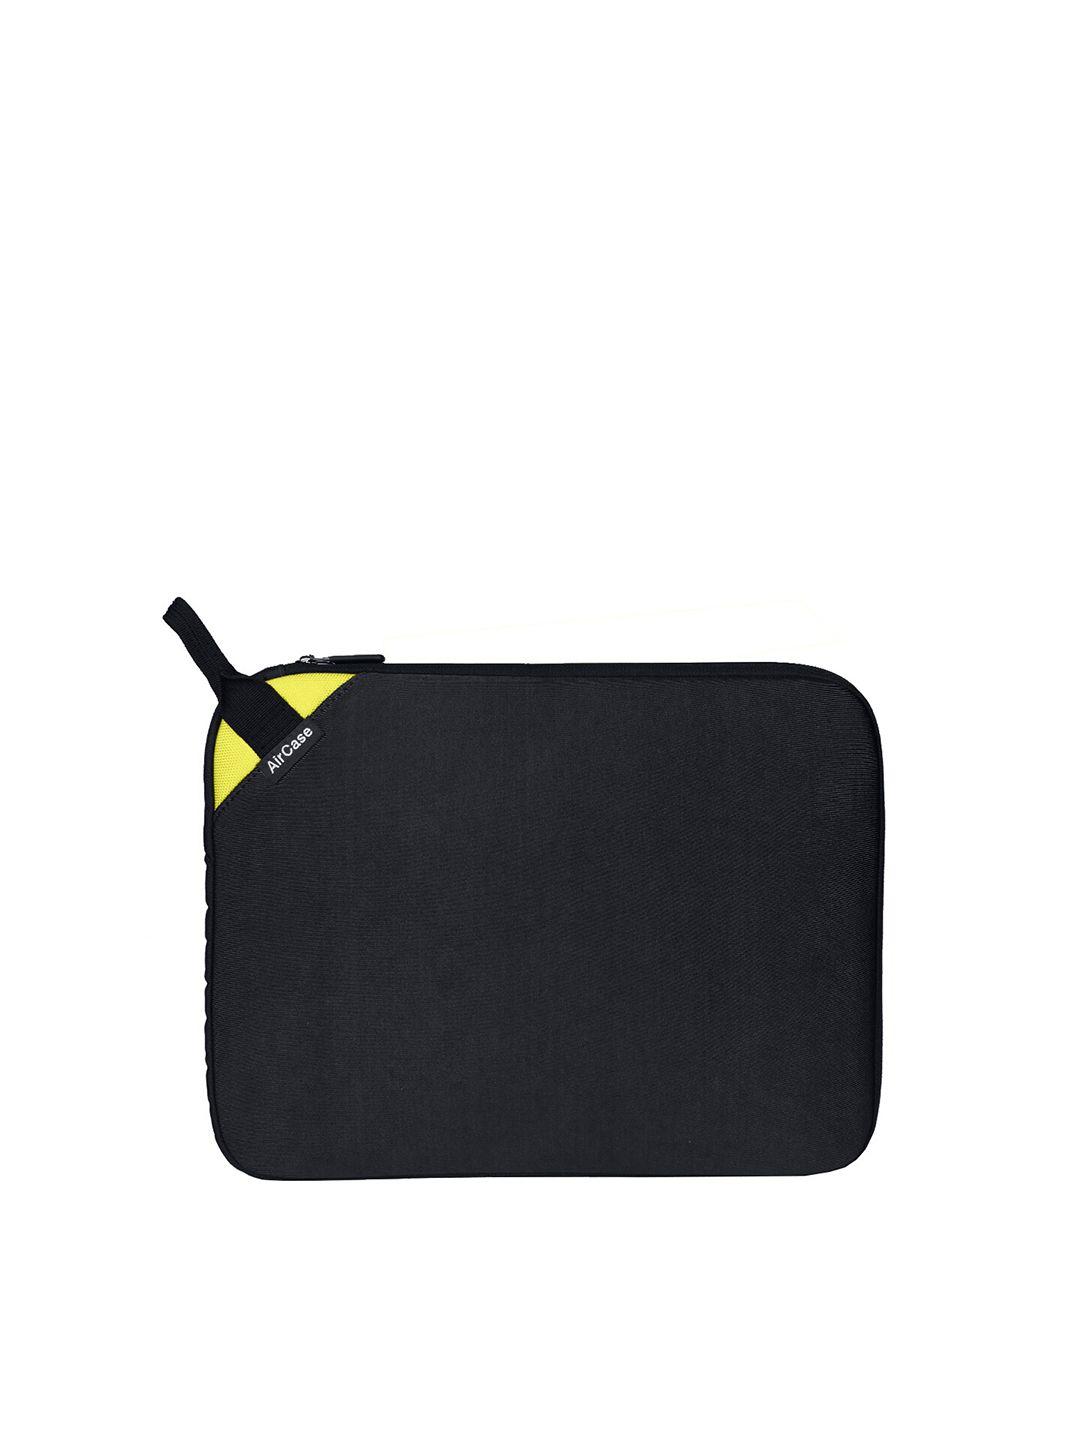 aircase unisex black & yellow 15.6 inch solid laptop sleeve with handle